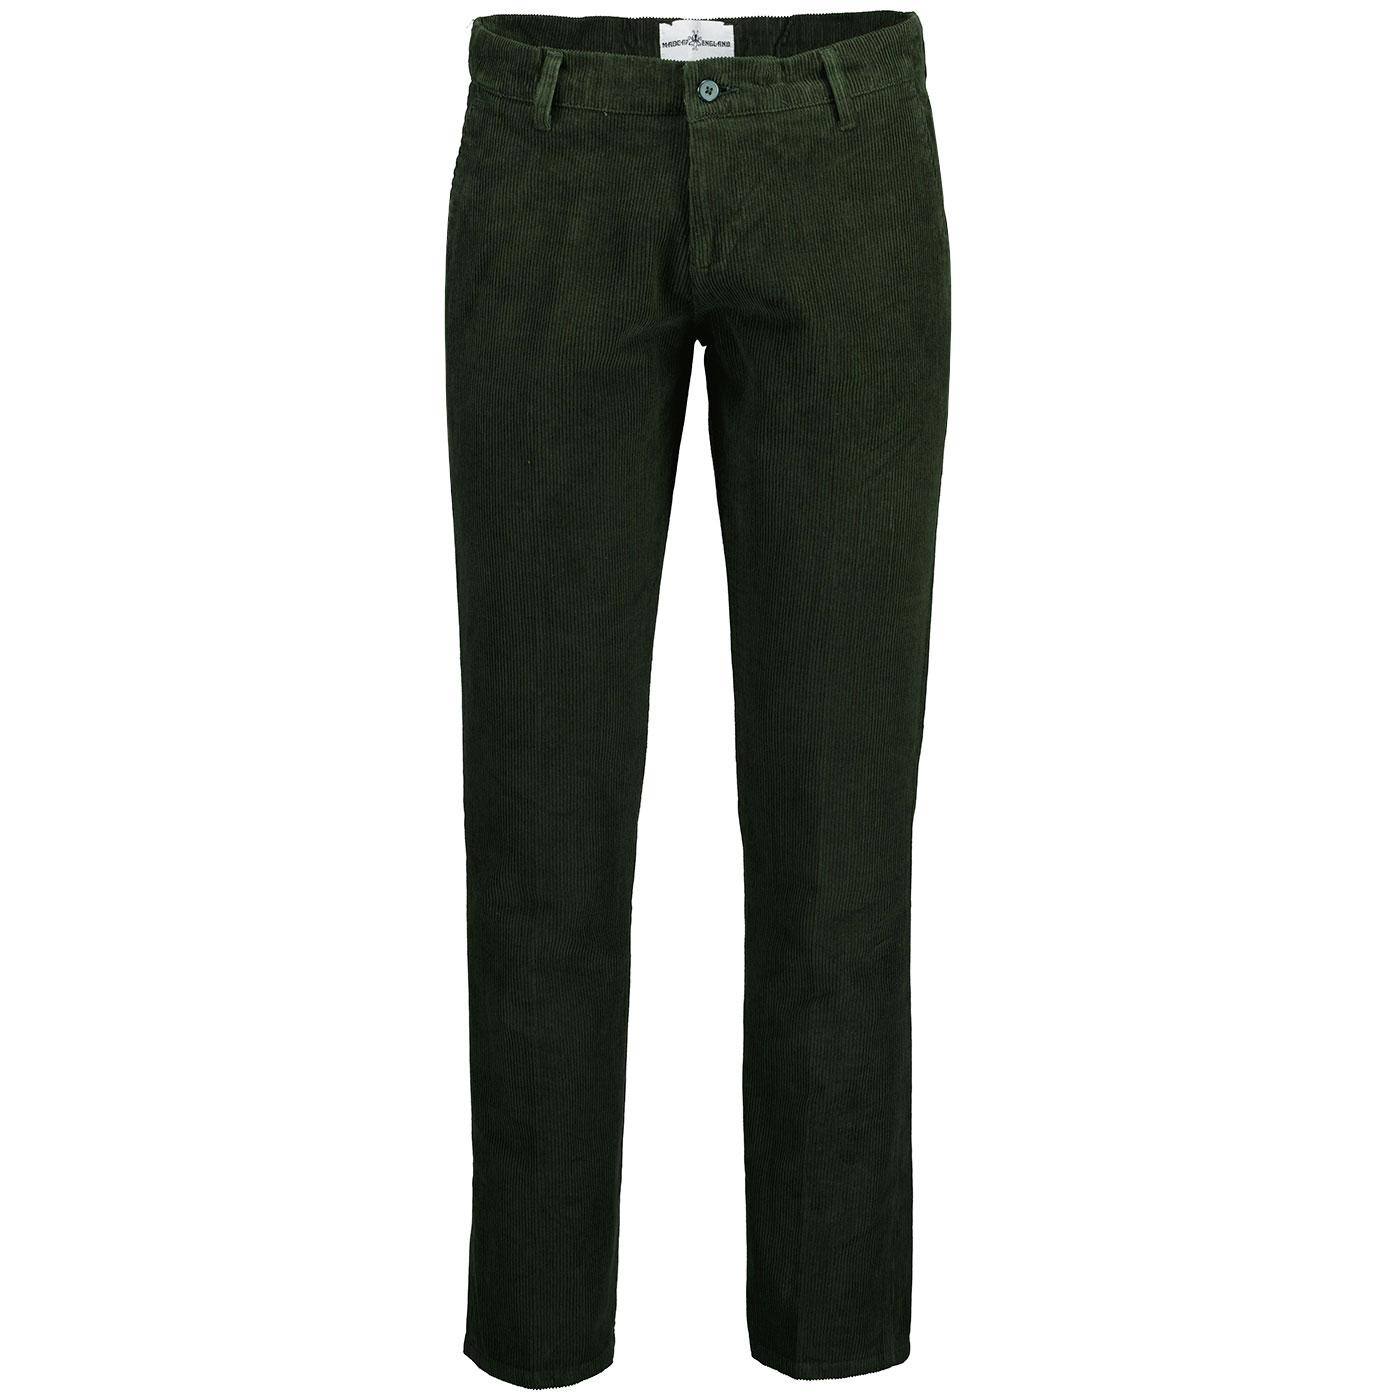 Madcap England Psycho Retro Mod Slim Cord Trousers in Green Forest